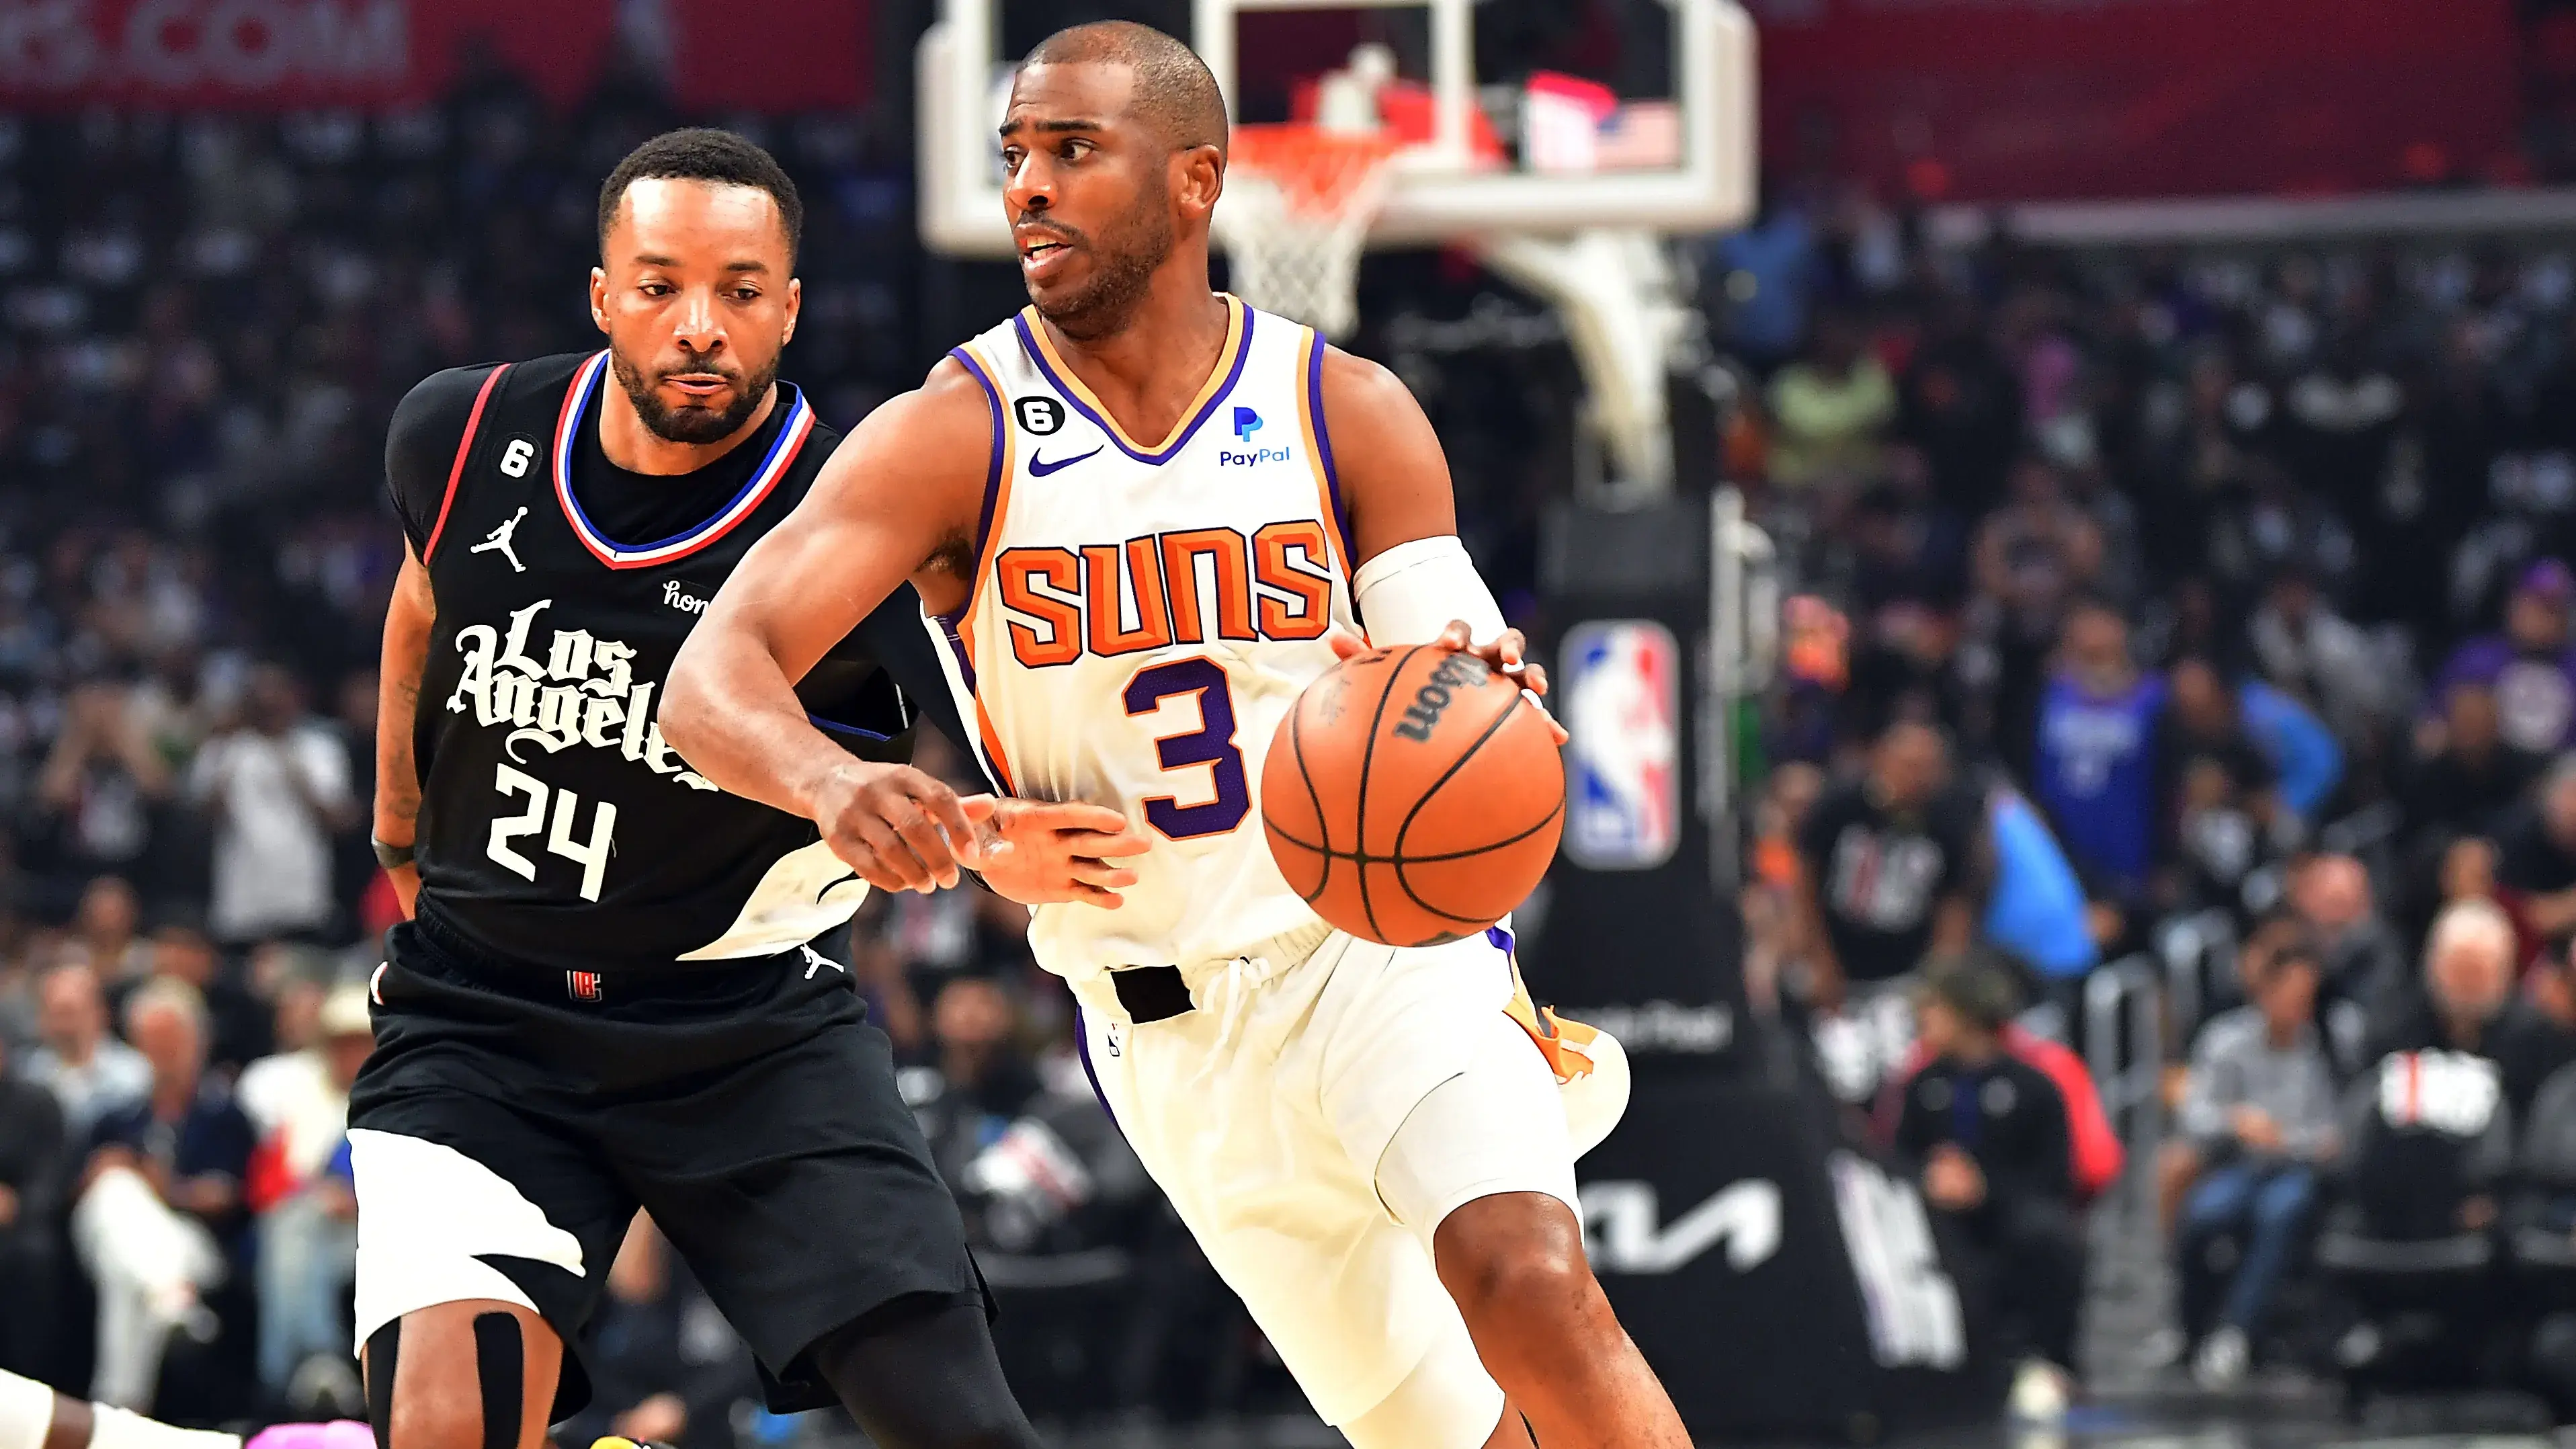 Phoenix Suns guard Chris Paul (3) moves the ball ahead of Los Angeles Clippers guard Norman Powell (24) during the first half in game four of the 2023 NBA playoffs at Crypto.com Arena / Gary A. Vasquez - USA TODAY Sports